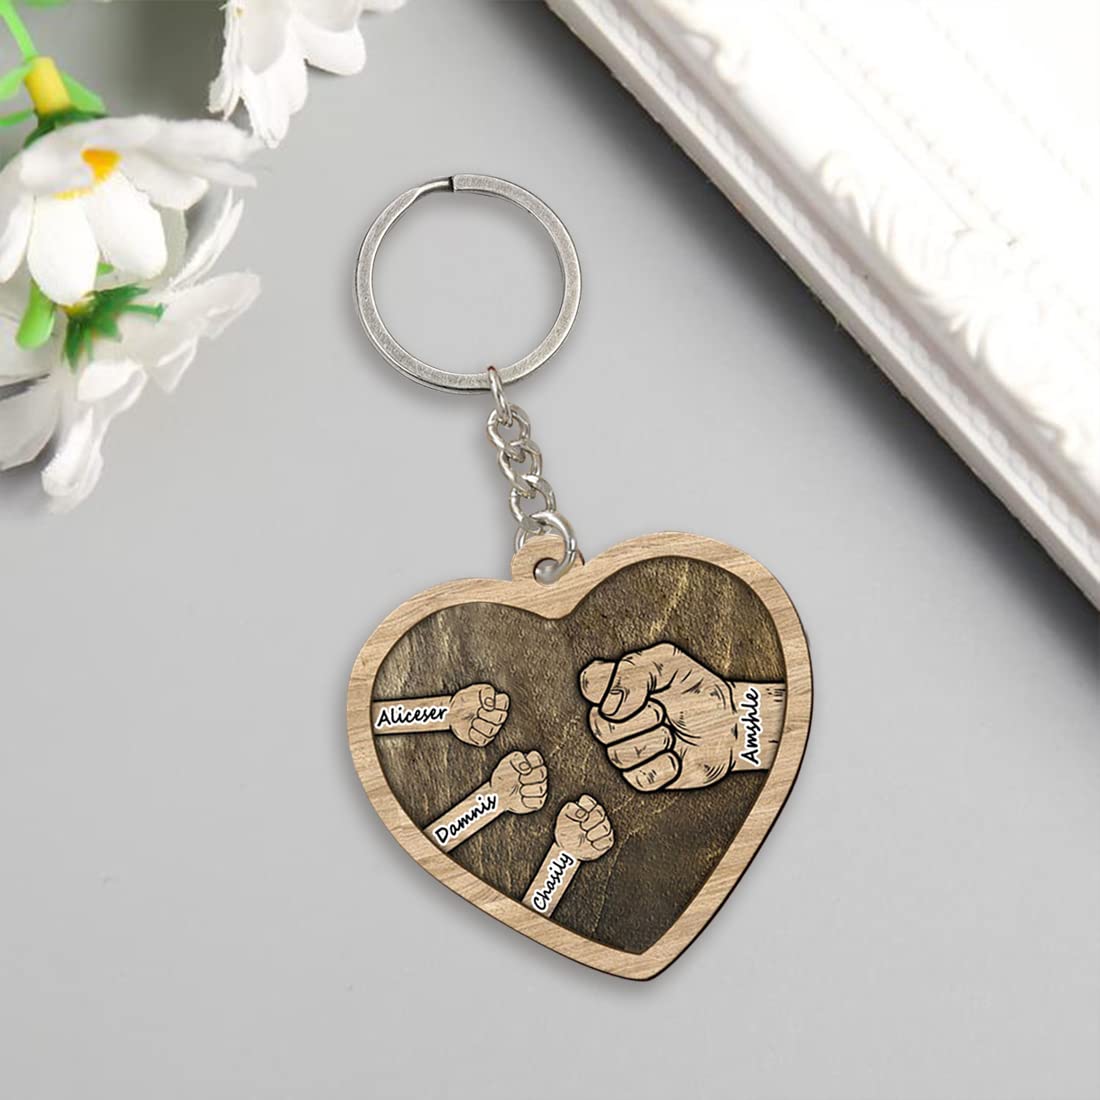 Father's Day-Personalized Fist Bump Keychain